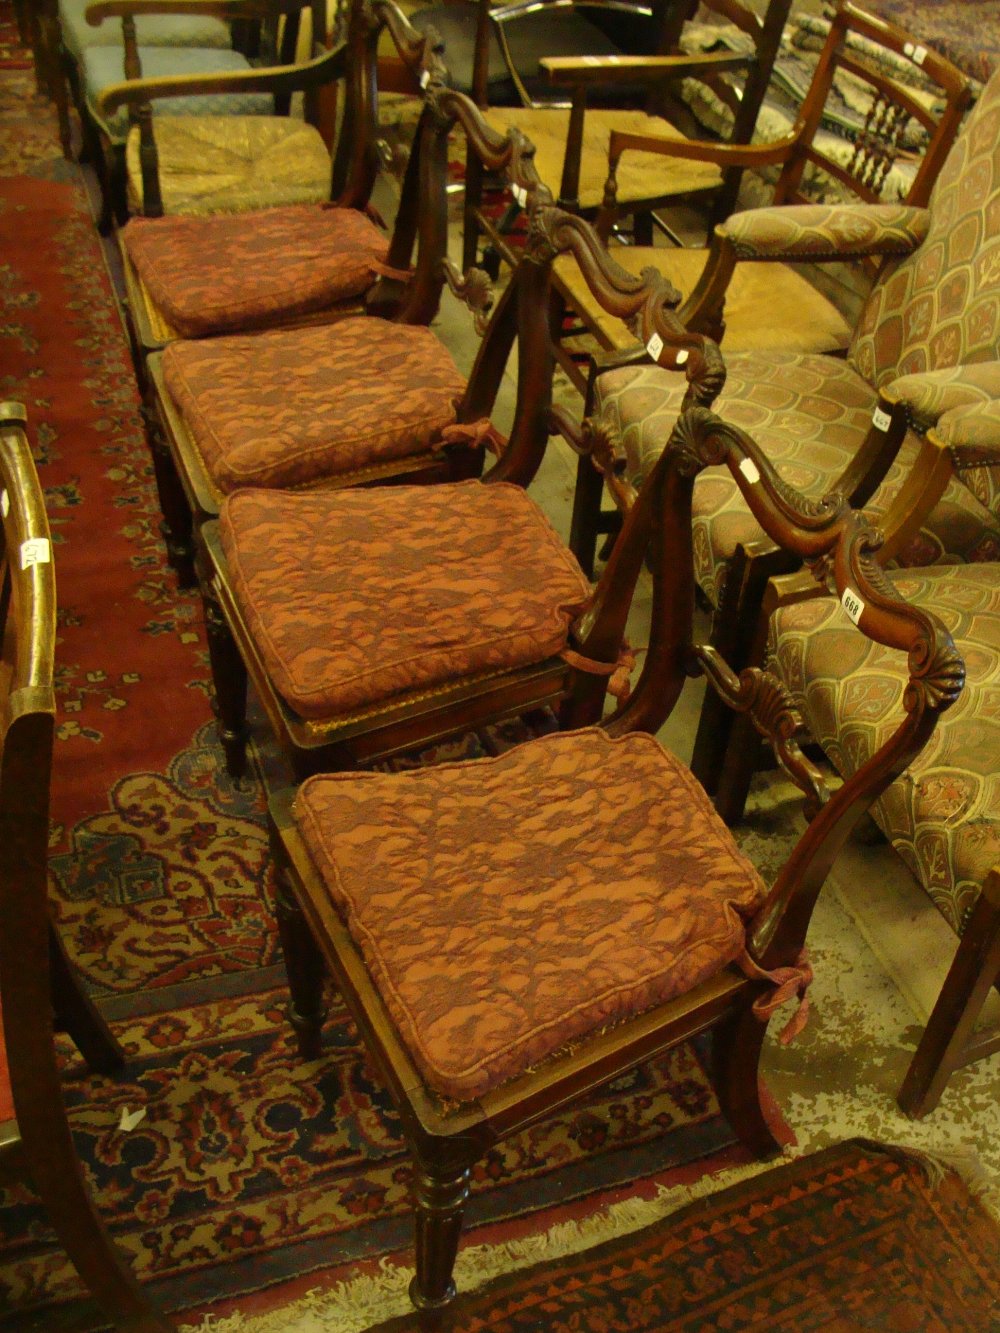 A set of four early Victorian mahogany parlour chairs with carved strolling backs above cane seats